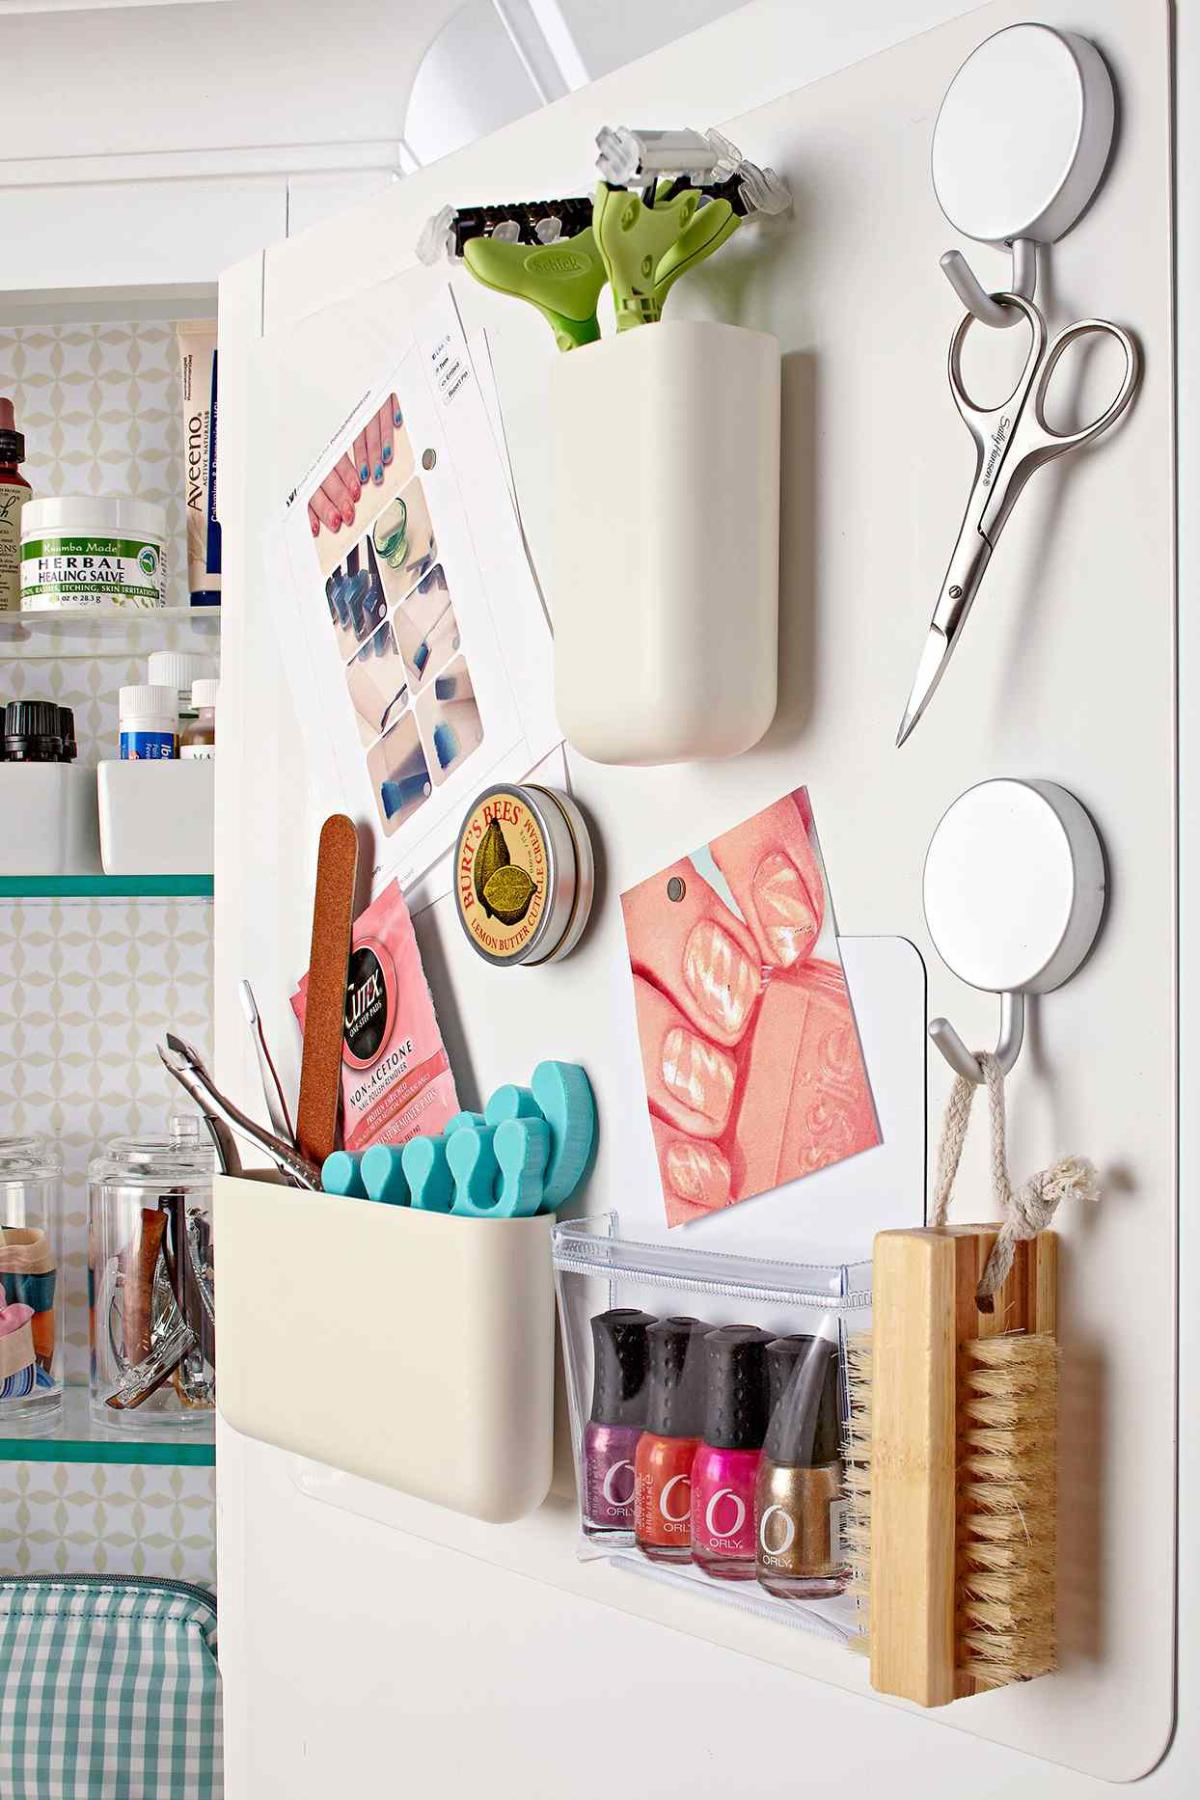 13 Small Bathroom Storage Ideas To Help You Organize Your Space Once And  For All - Narcity